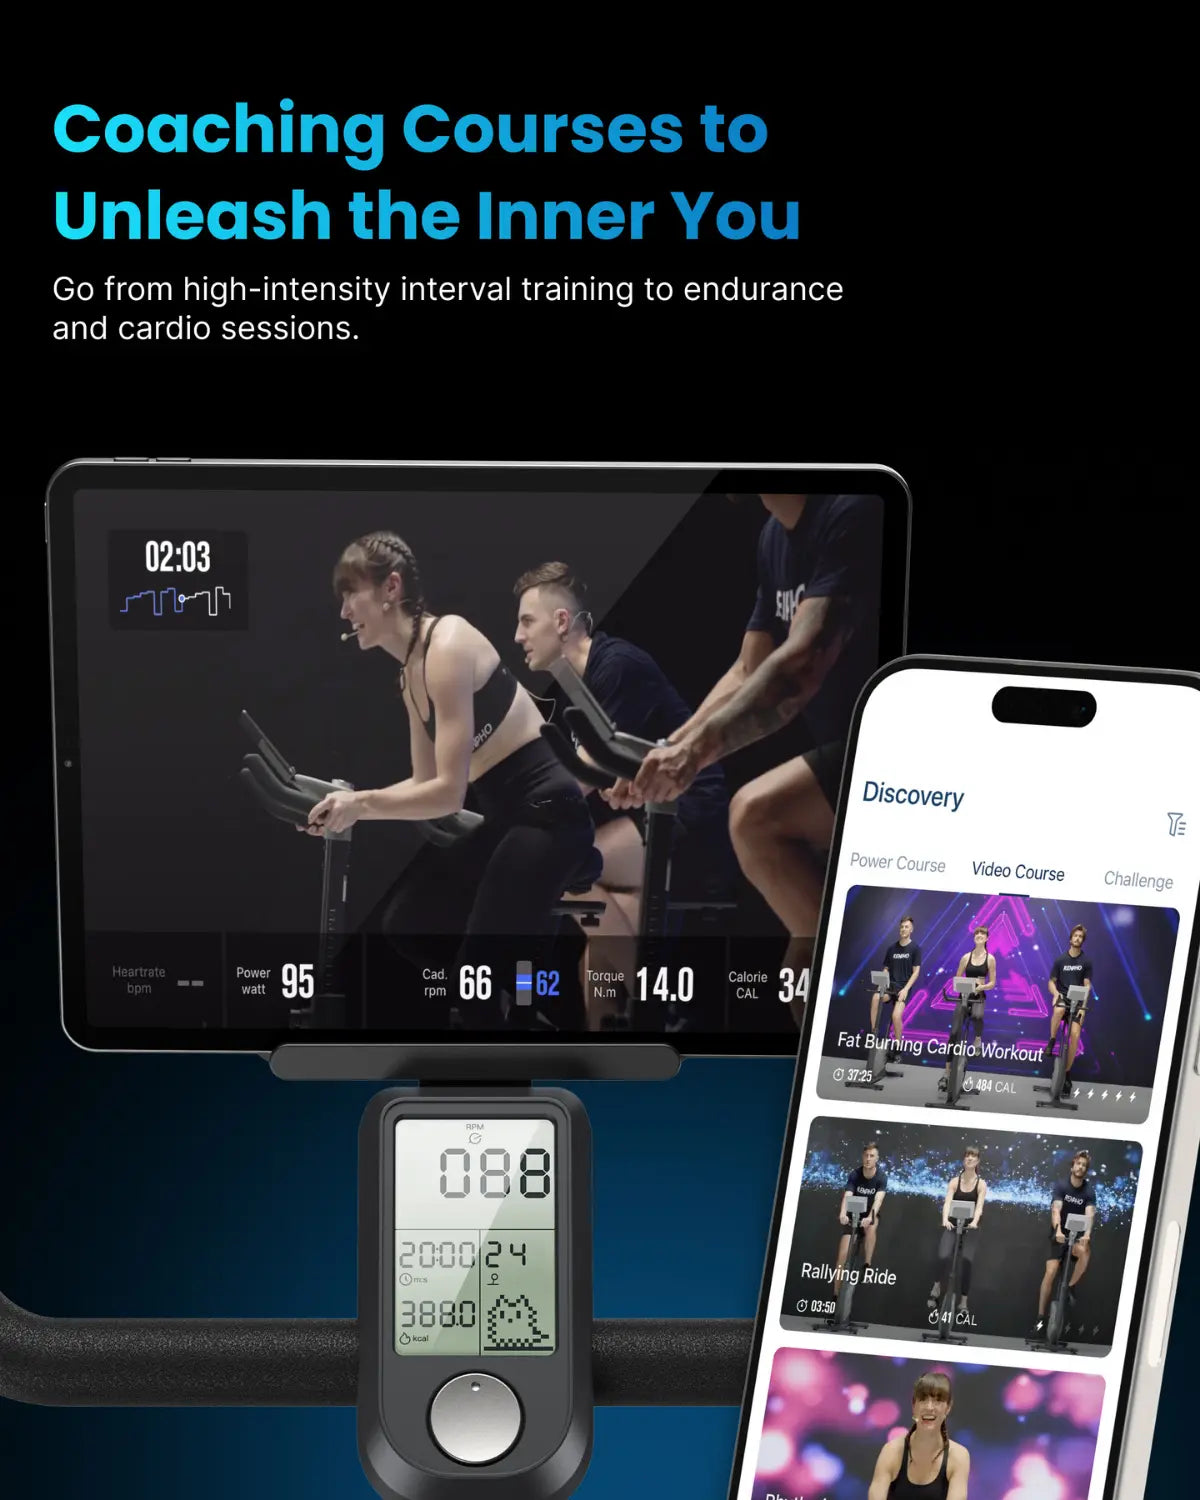 A fitness app advertisement showcases a tablet and smartphone displaying diverse training programs for cycling workouts. The tablet features a live, immersive fitness experience with participants and metrics, while the smartphone lists personalized AI courses. An AI Smart Bike S by Renpho EU showing workout stats is also visible.